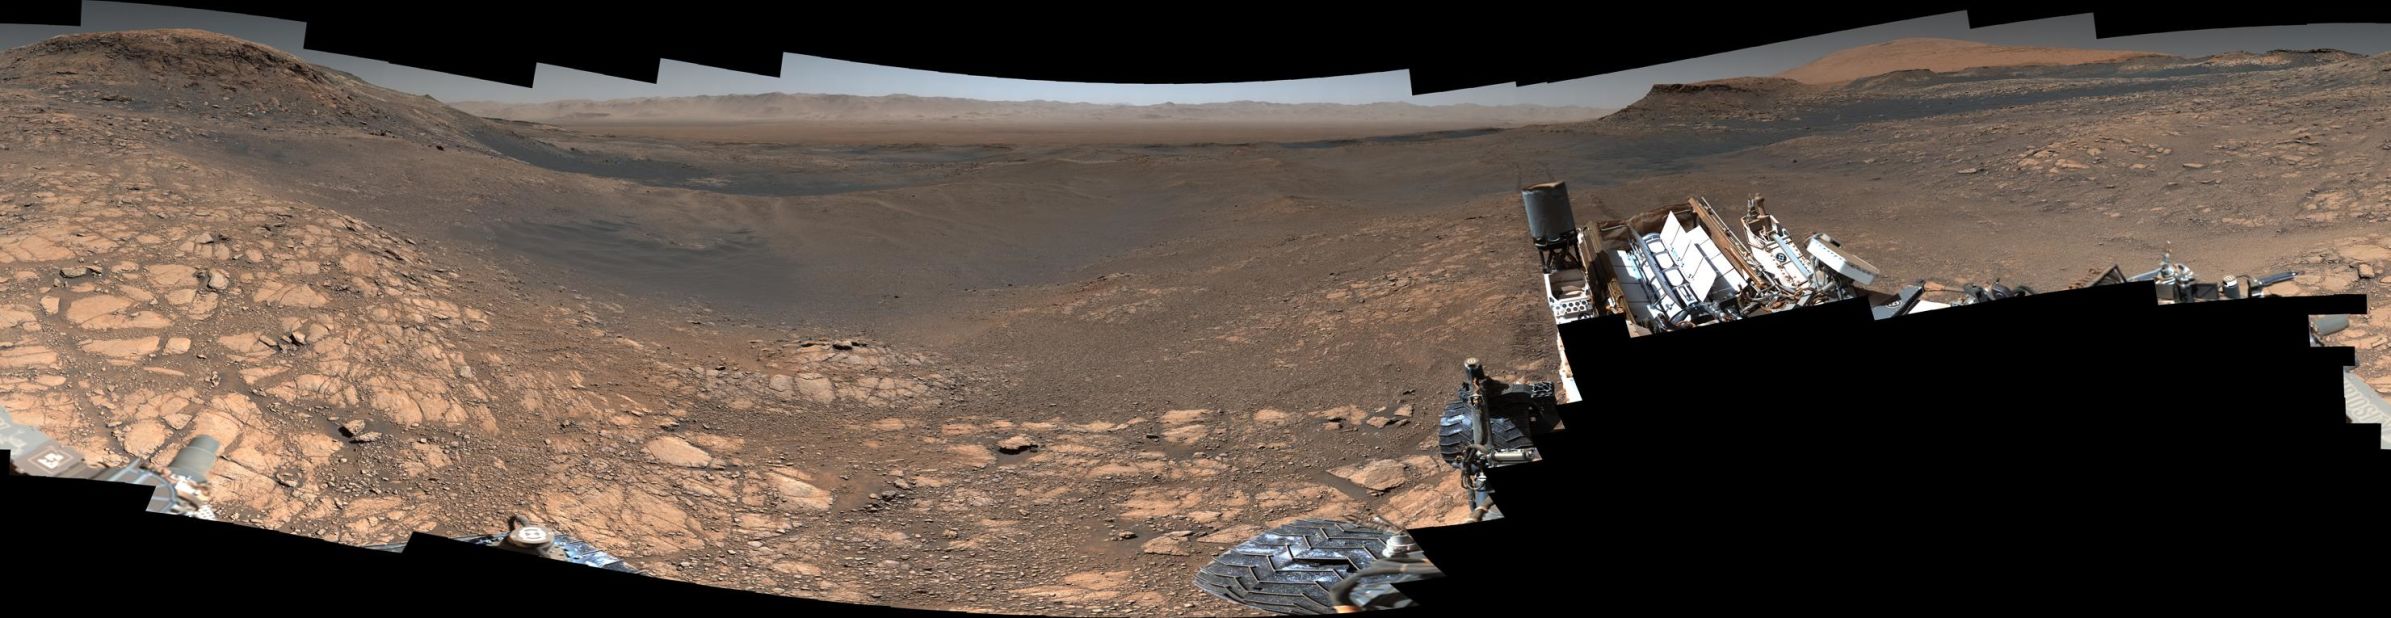 NASA's Curiosity rover captured its highest-resolution panorama of the Martian surface in late 2019. This includes more than 1,000 images and 1.8 billion pixels.